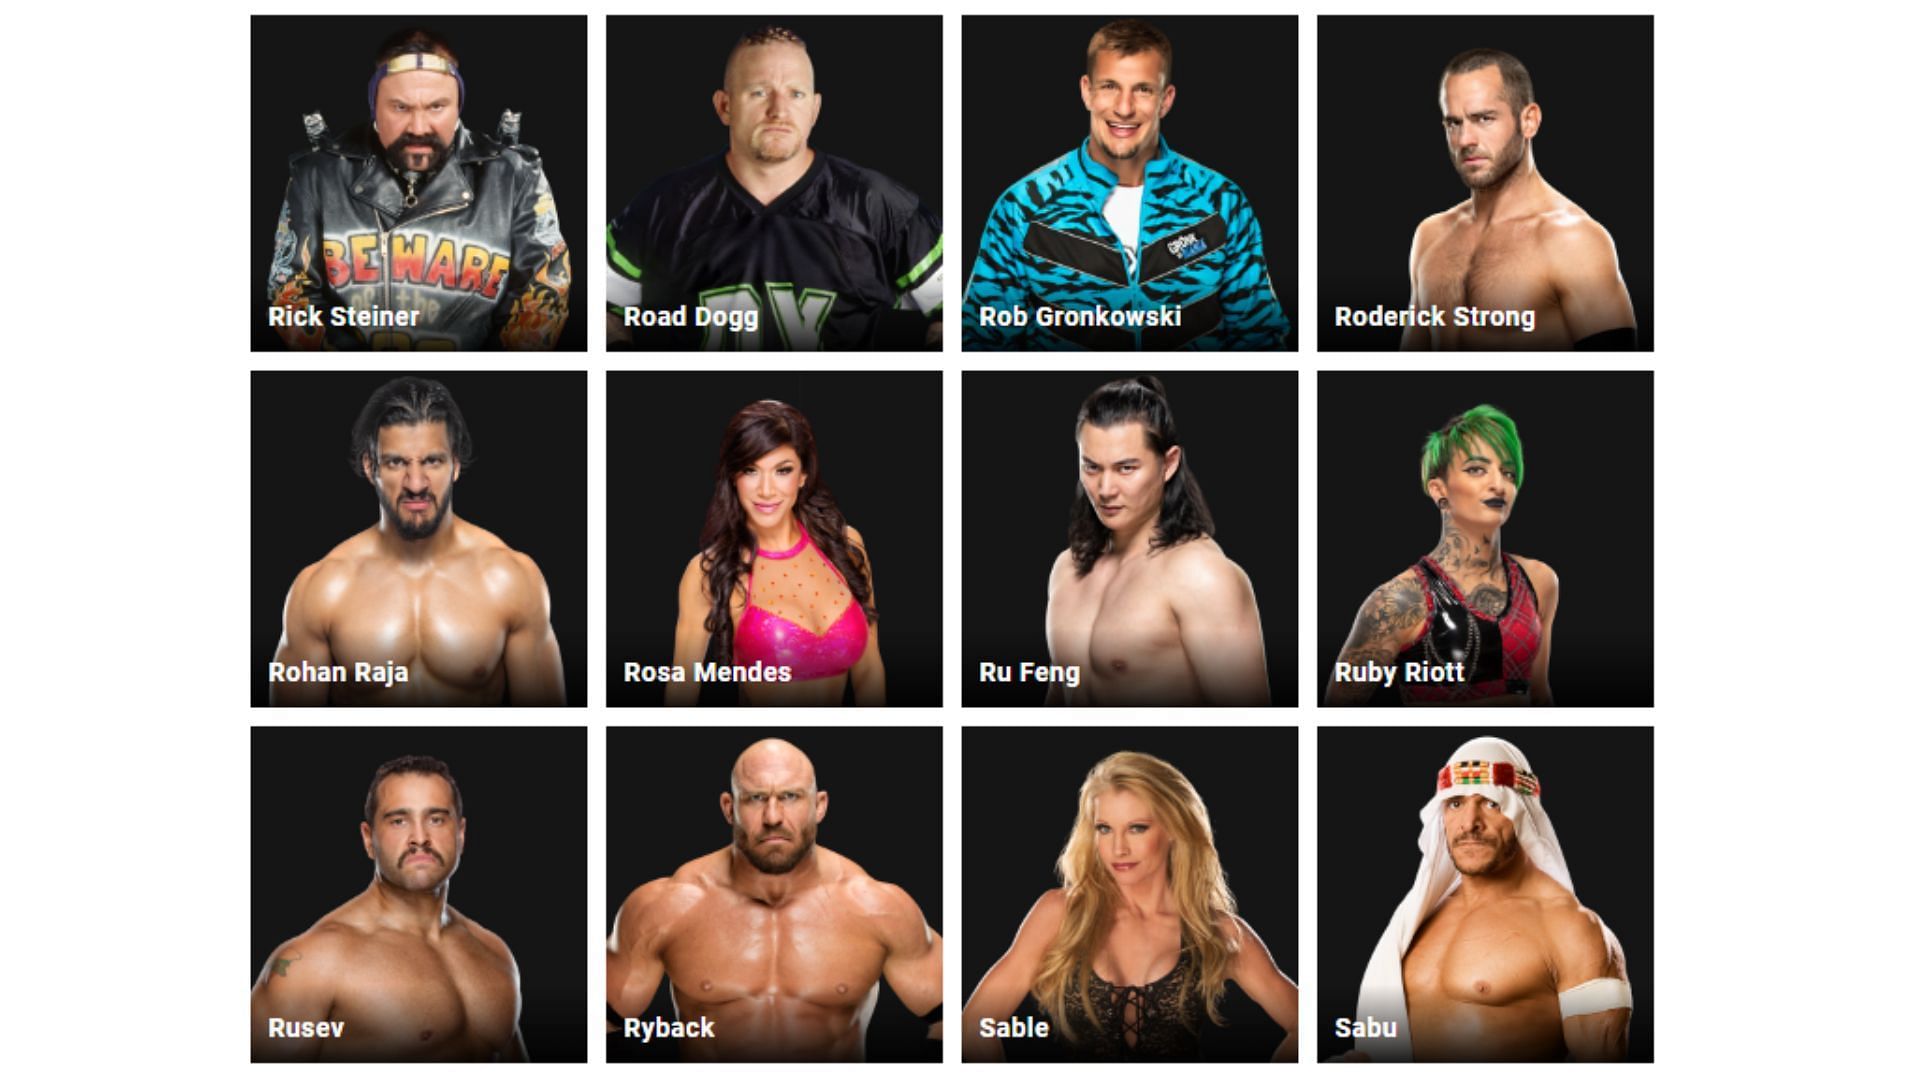 Roderick Strong can now be found in the official WWE Alumni section.